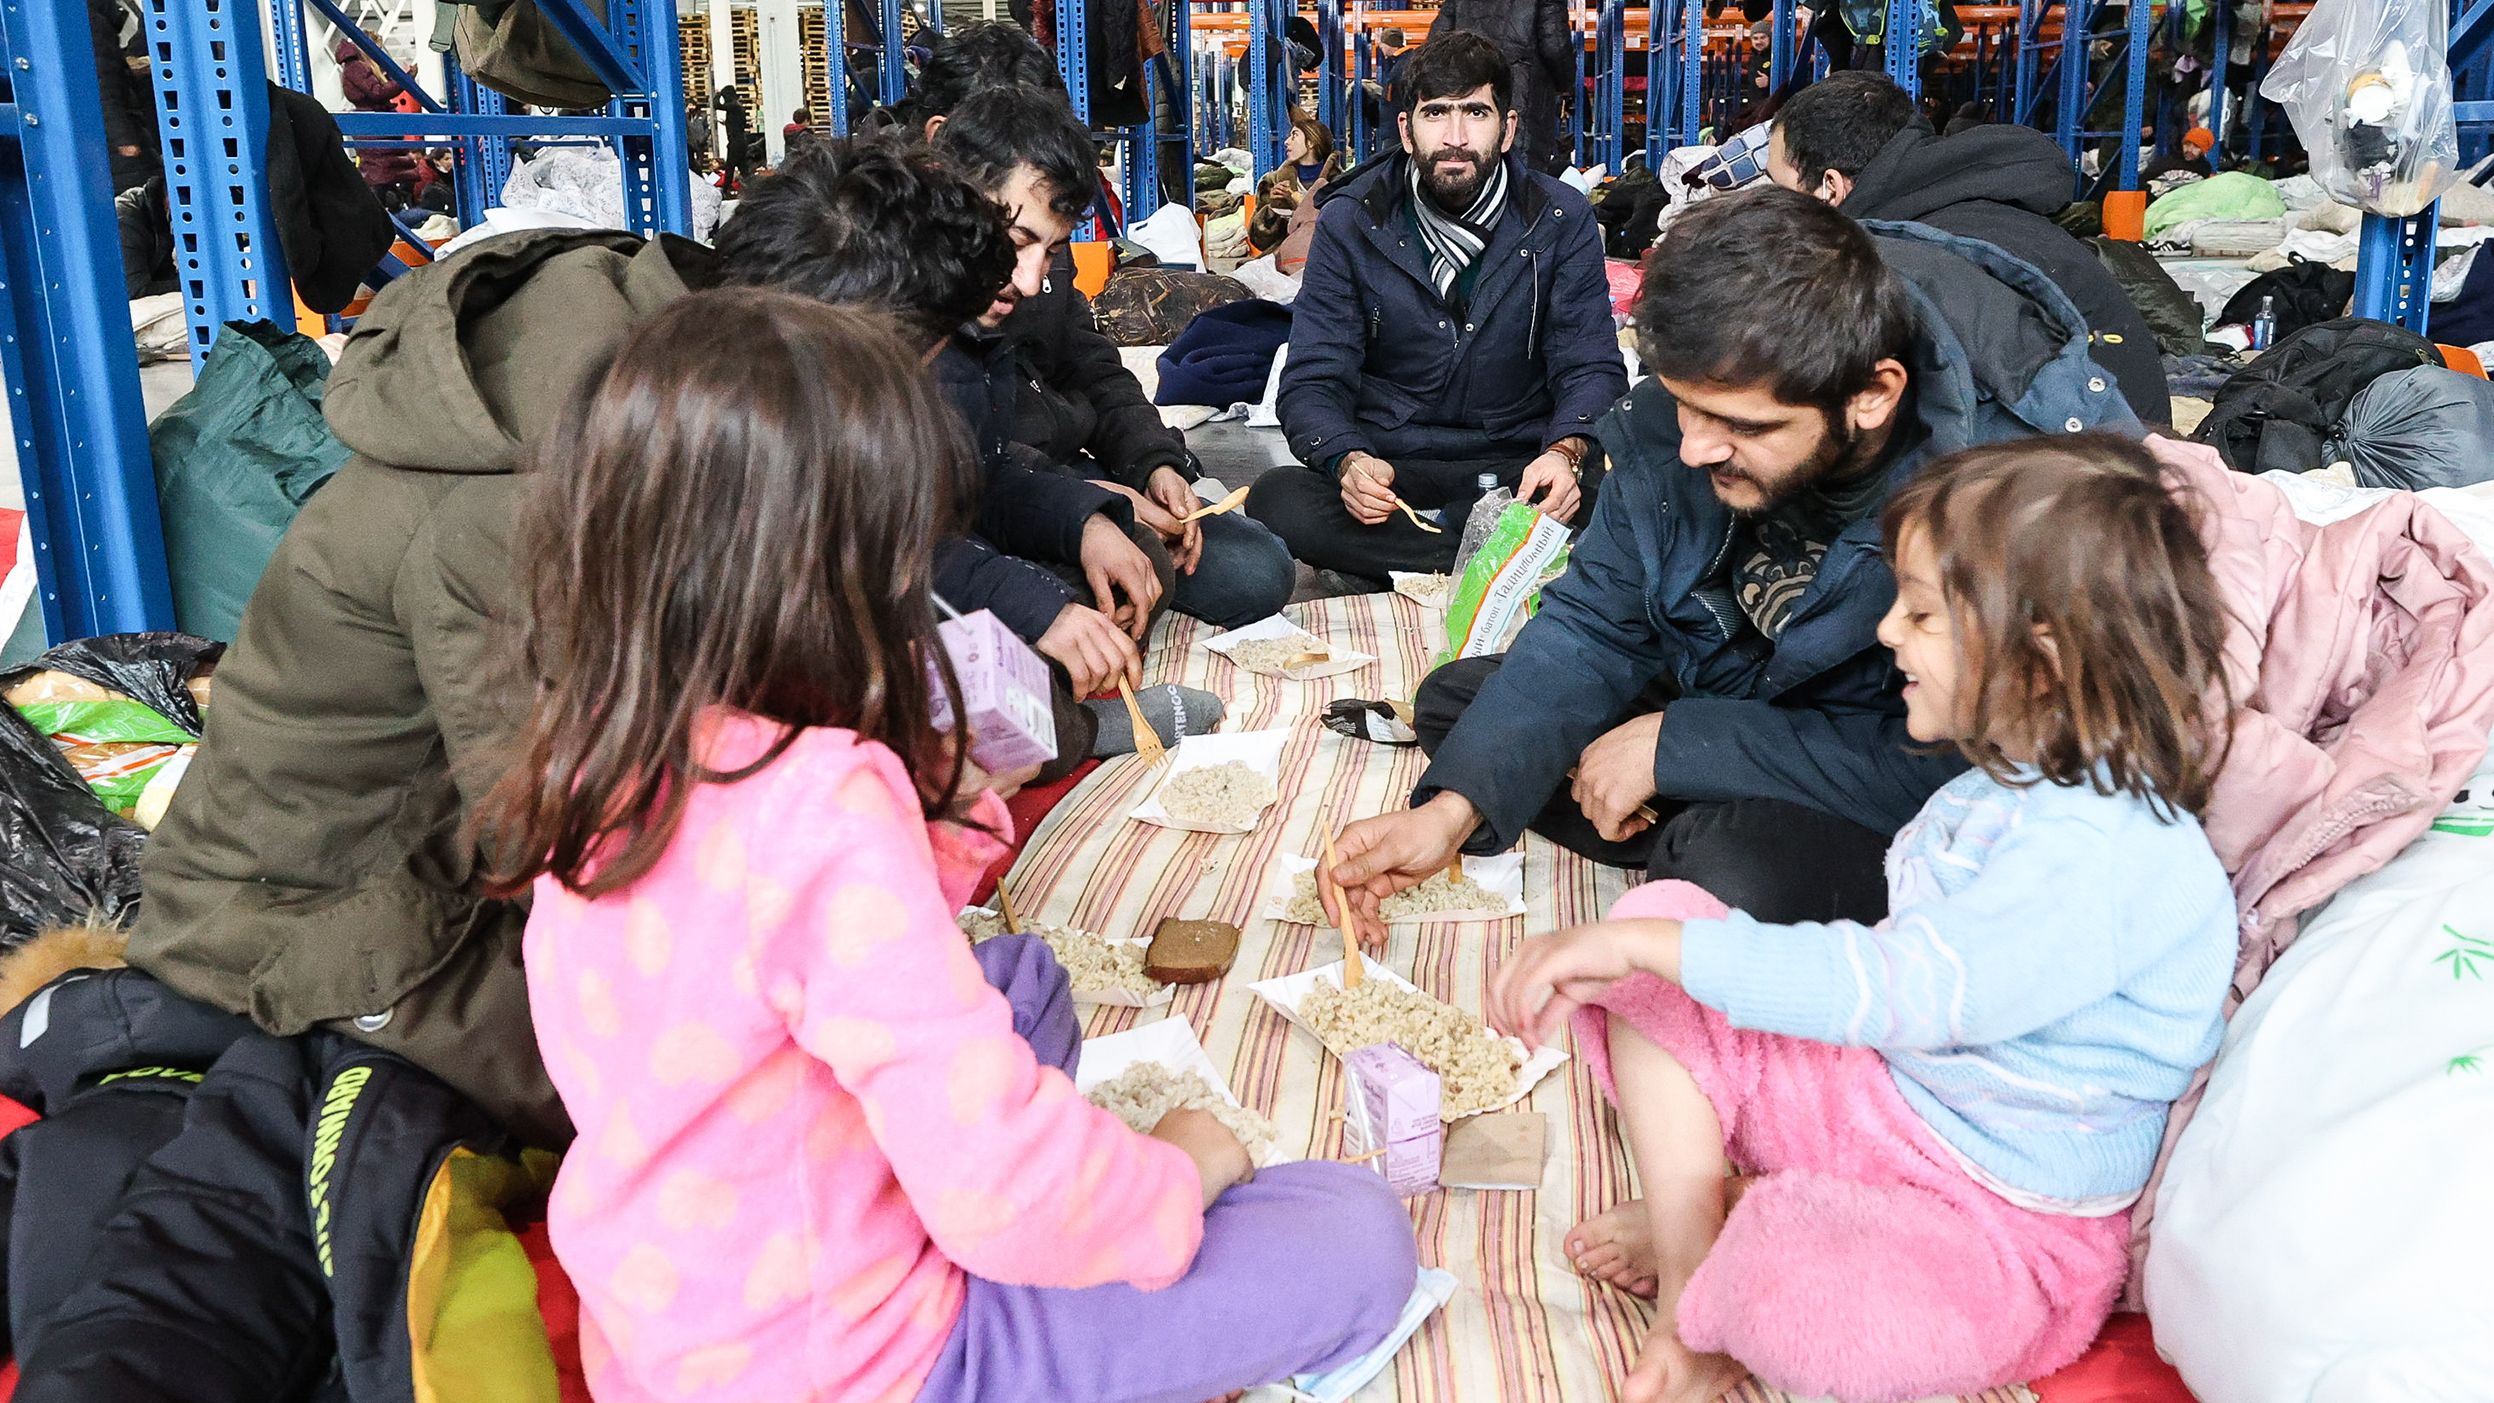 Migrants get a hot meal near the Bruzgi checkpoint on the Polish border on Tuesday, November 17, after a shelter was set up in a warehouse.